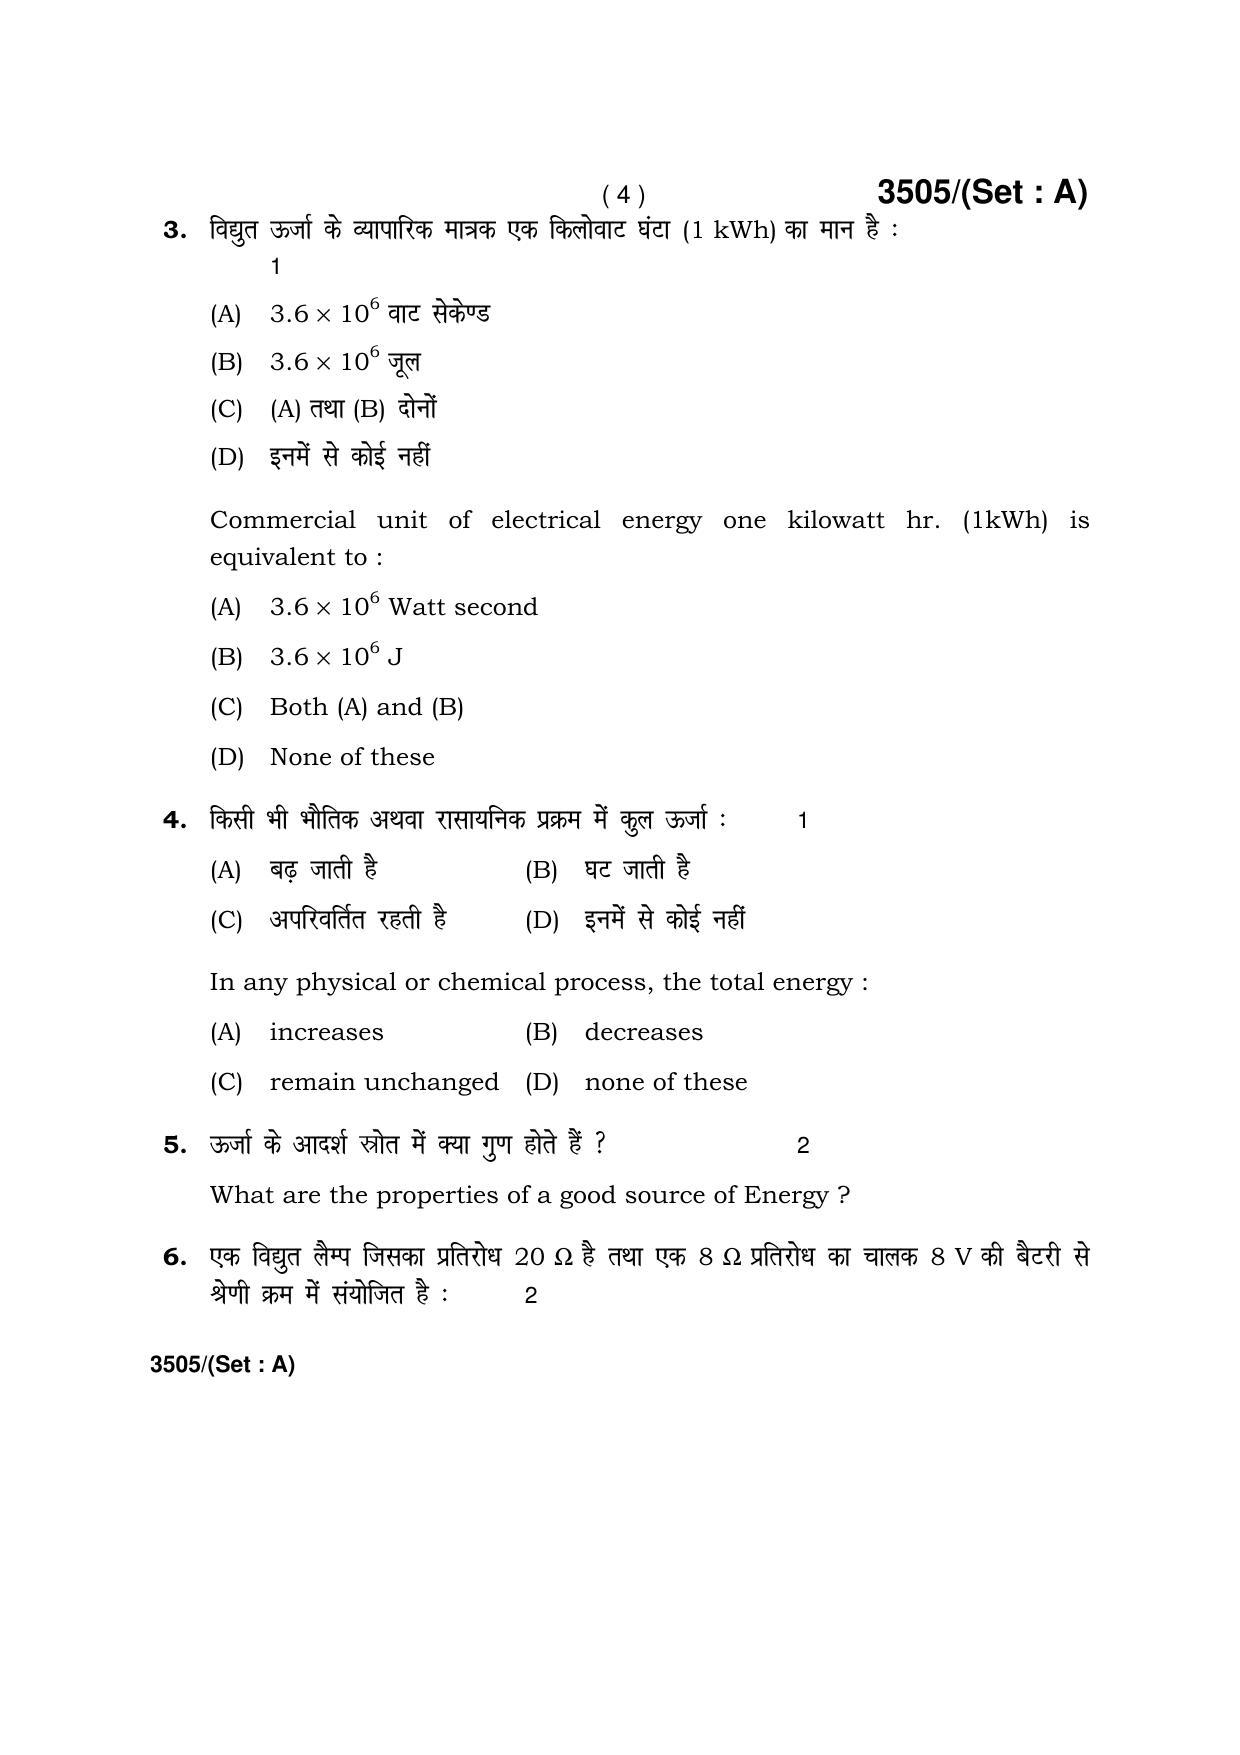 Haryana Board HBSE Class 10 Science -A 2018 Question Paper - Page 4